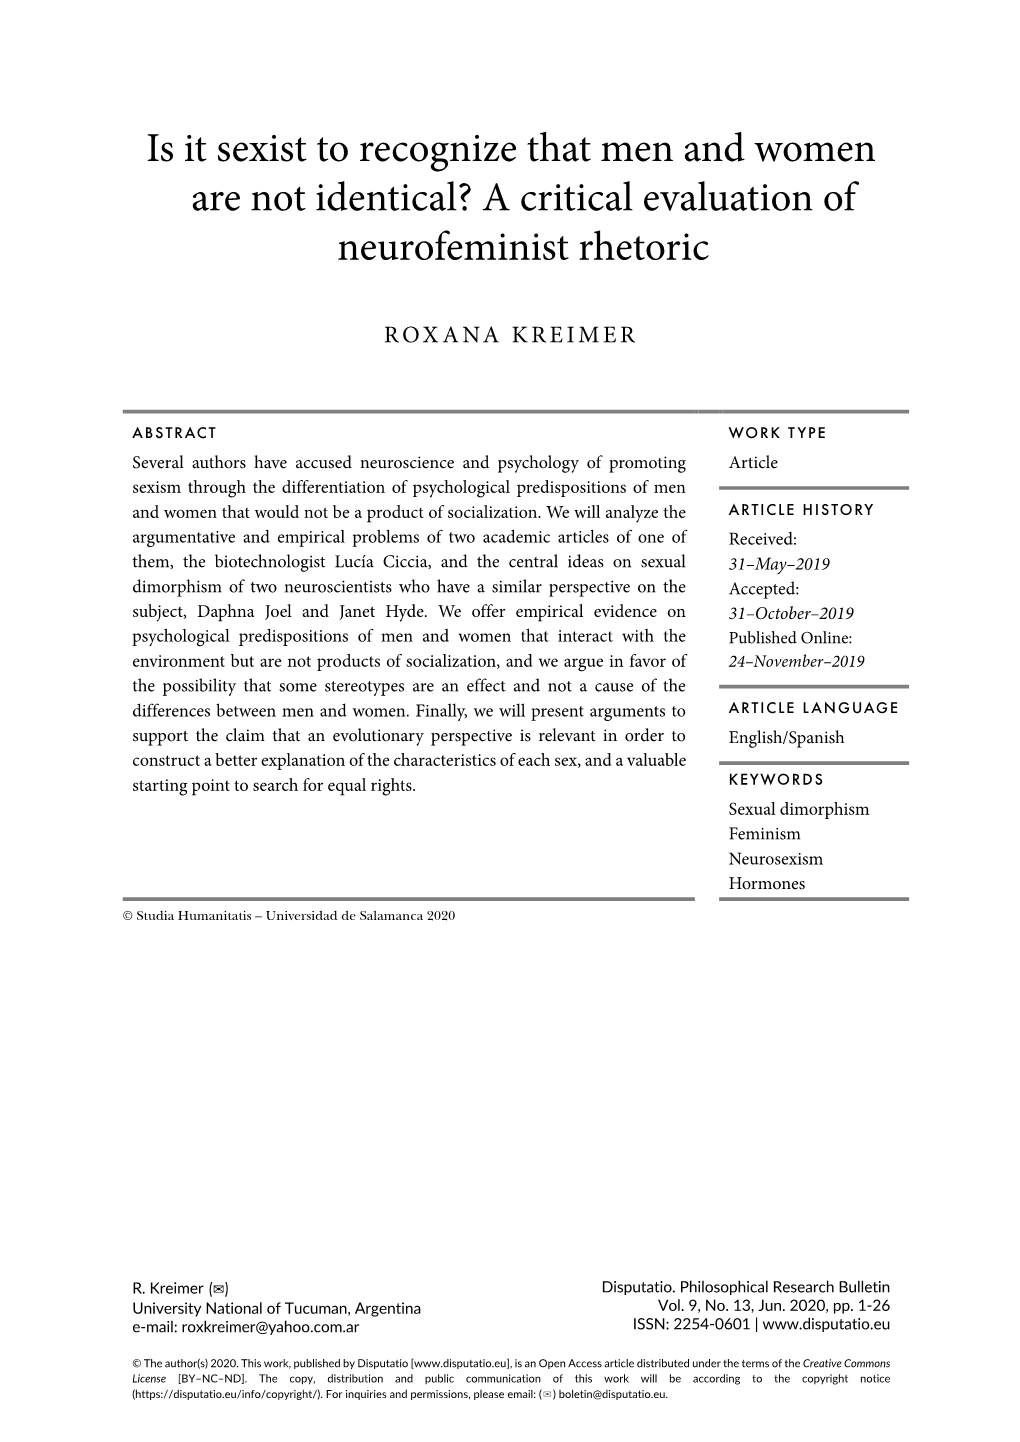 Is It Sexist to Recognize That Men and Women Are Not Identical? a Critical Evaluation of Neurofeminist Rhetoric